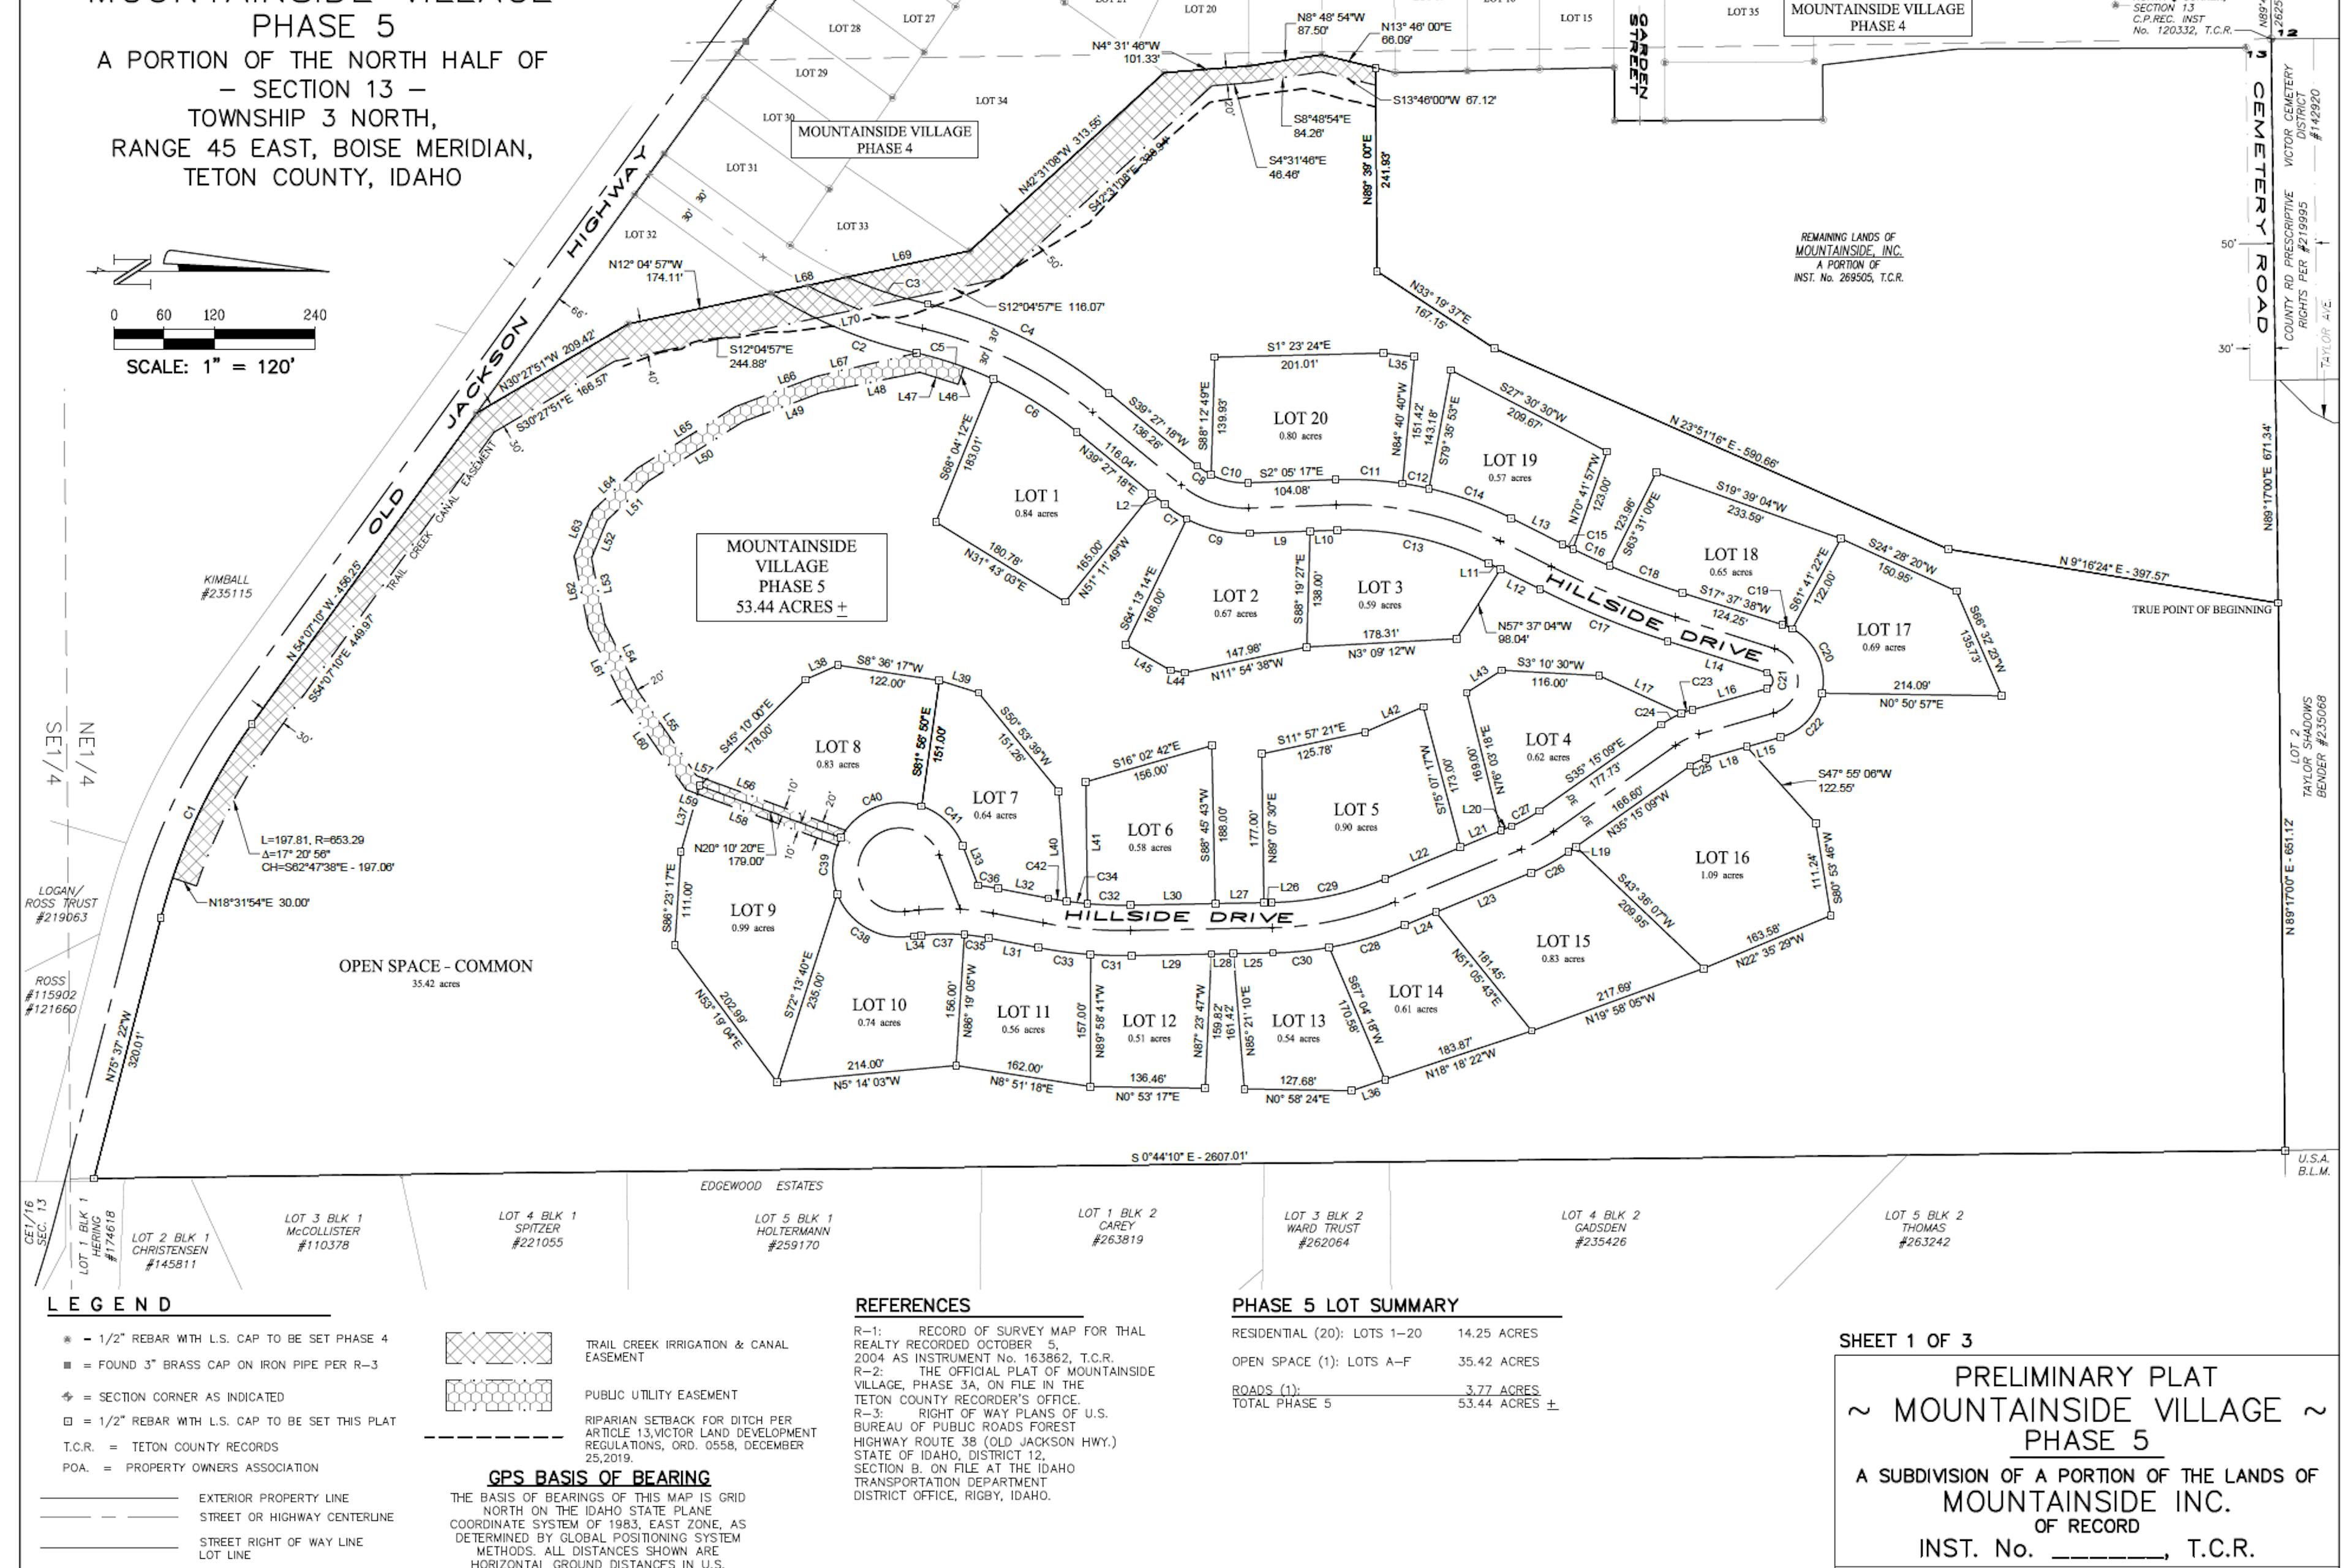 Preliminary Plat of Mountainside Village Phase 5